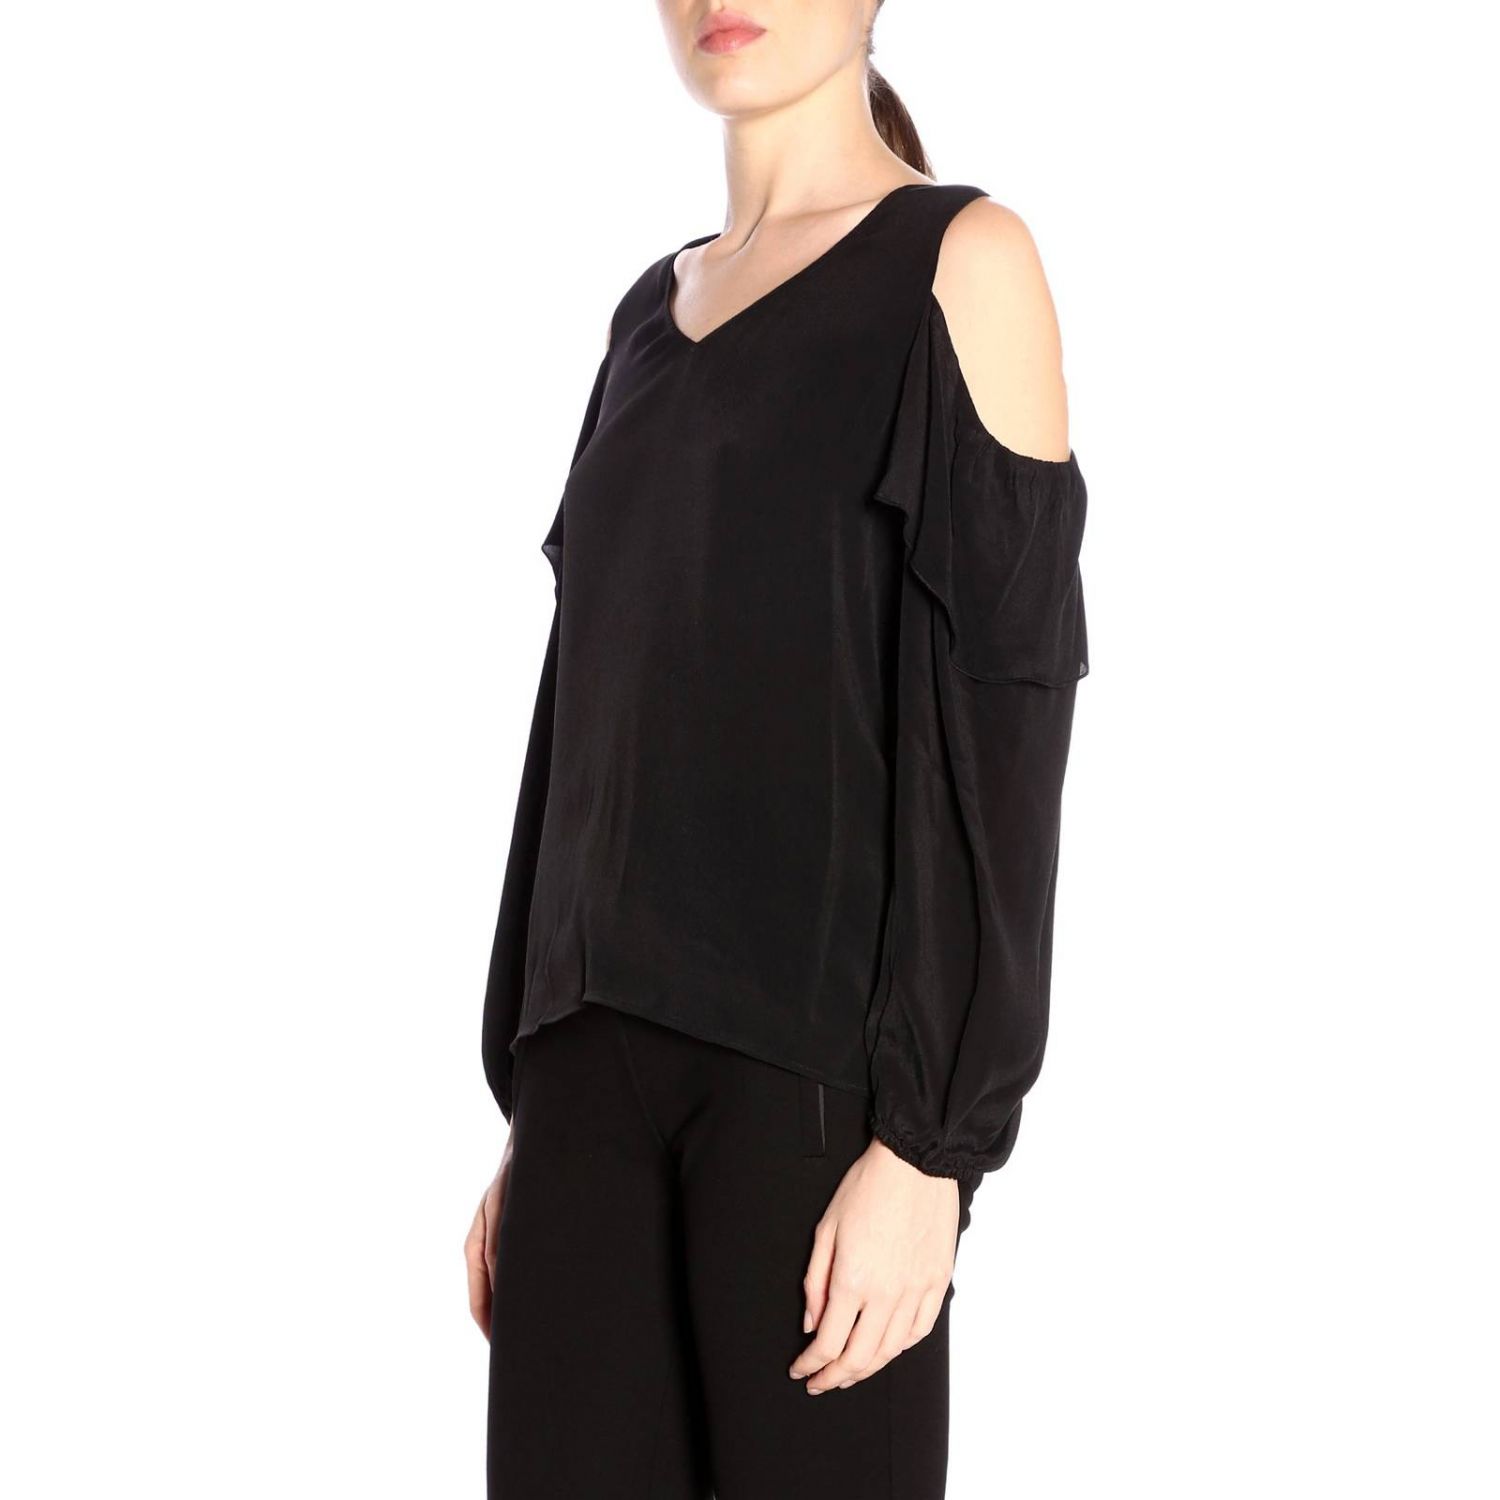 Twinset Outlet: Top women Twin Set - Black | Top Twinset 191TP214C ...